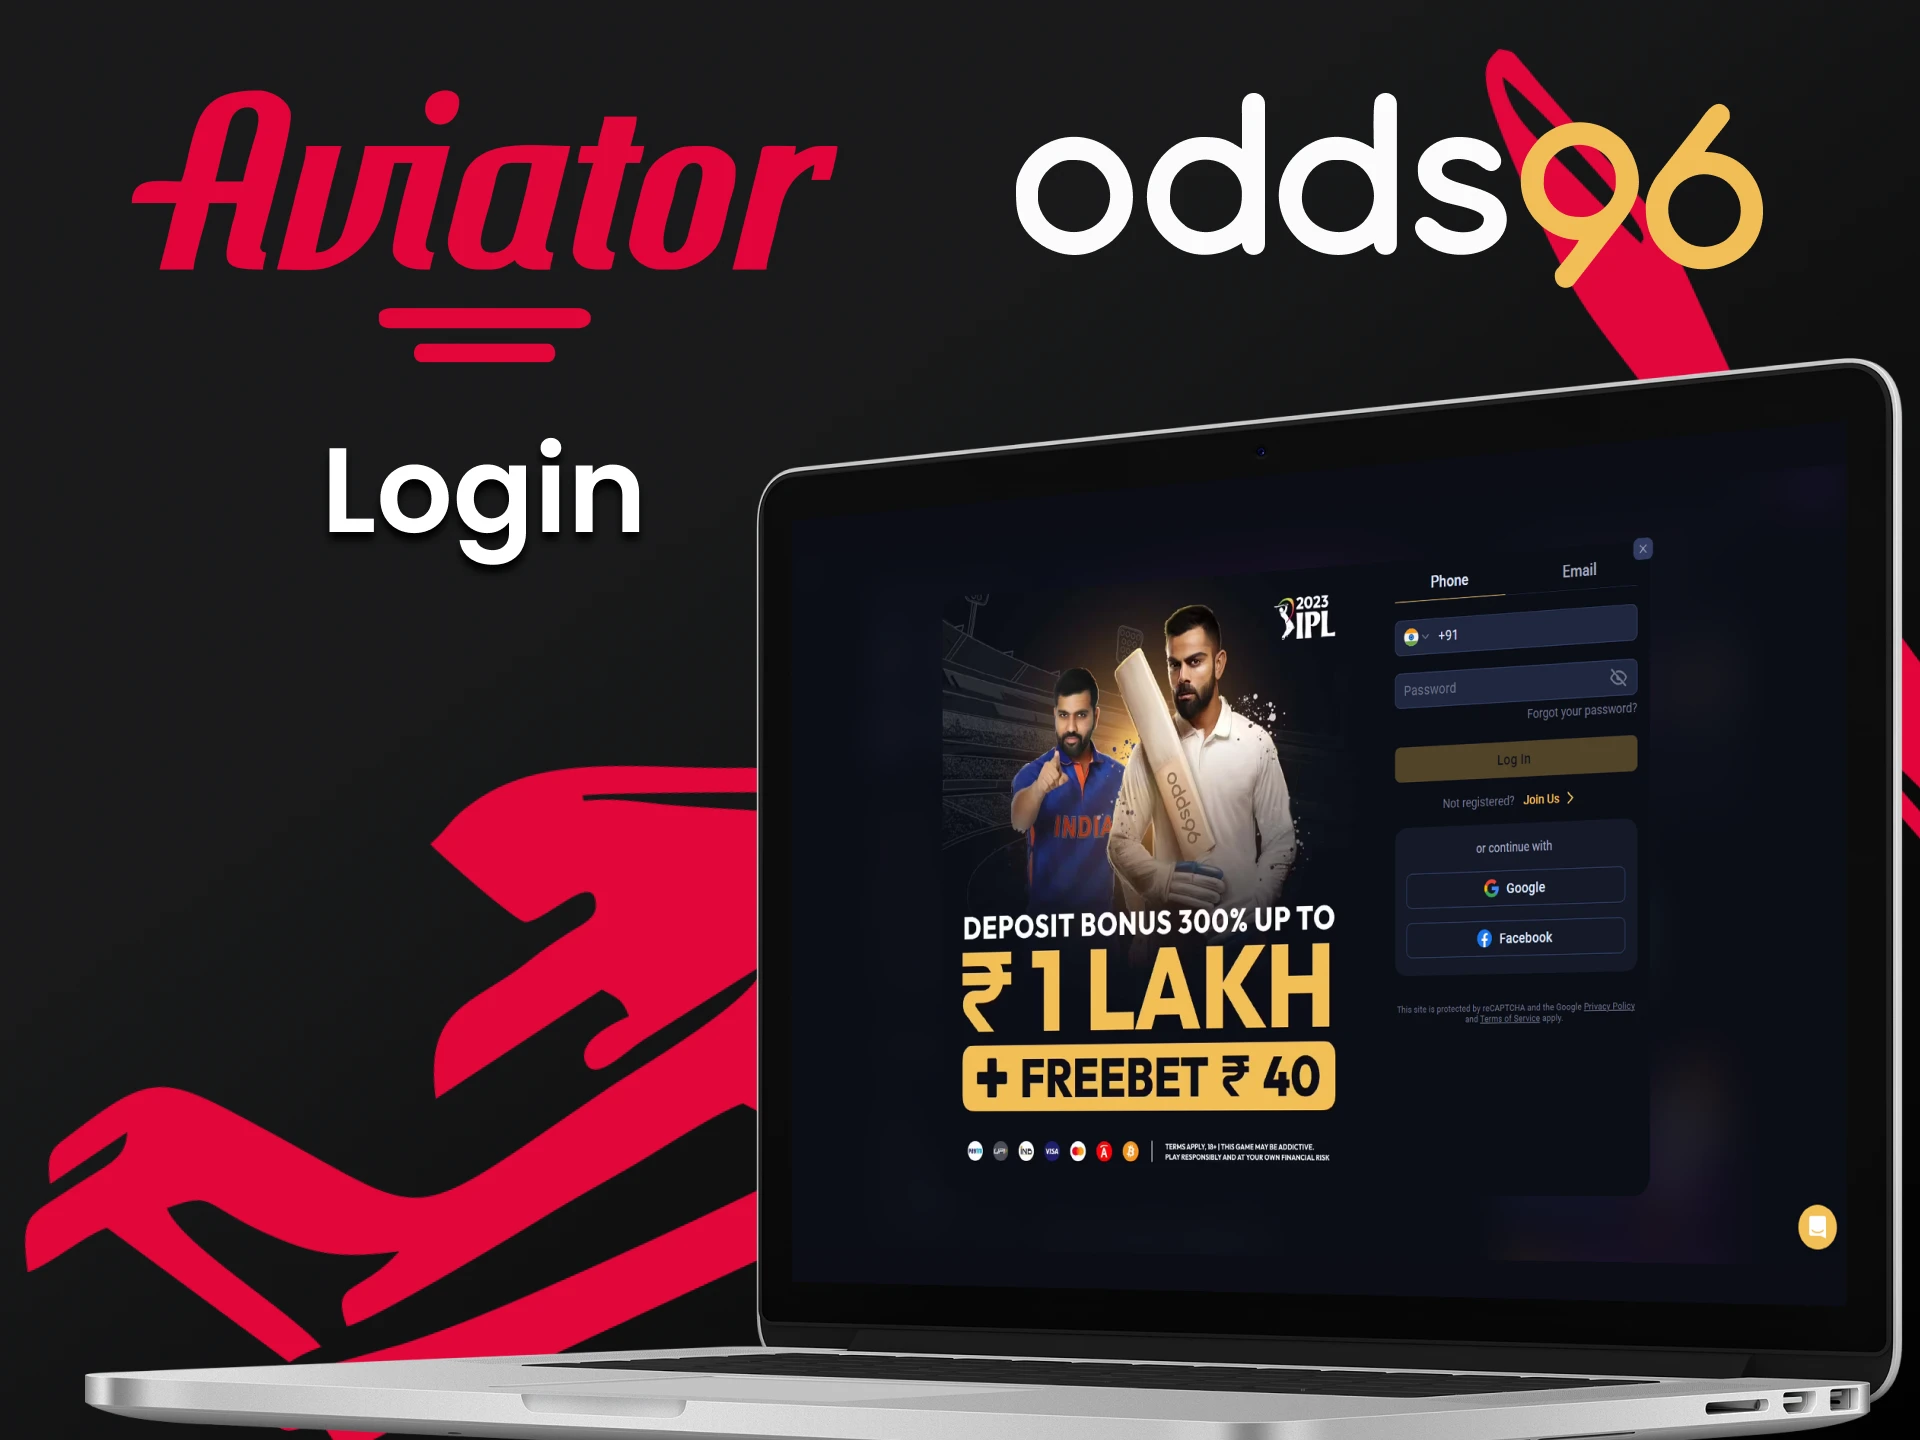 To play Aviator, log in to your personal Odds96 account.